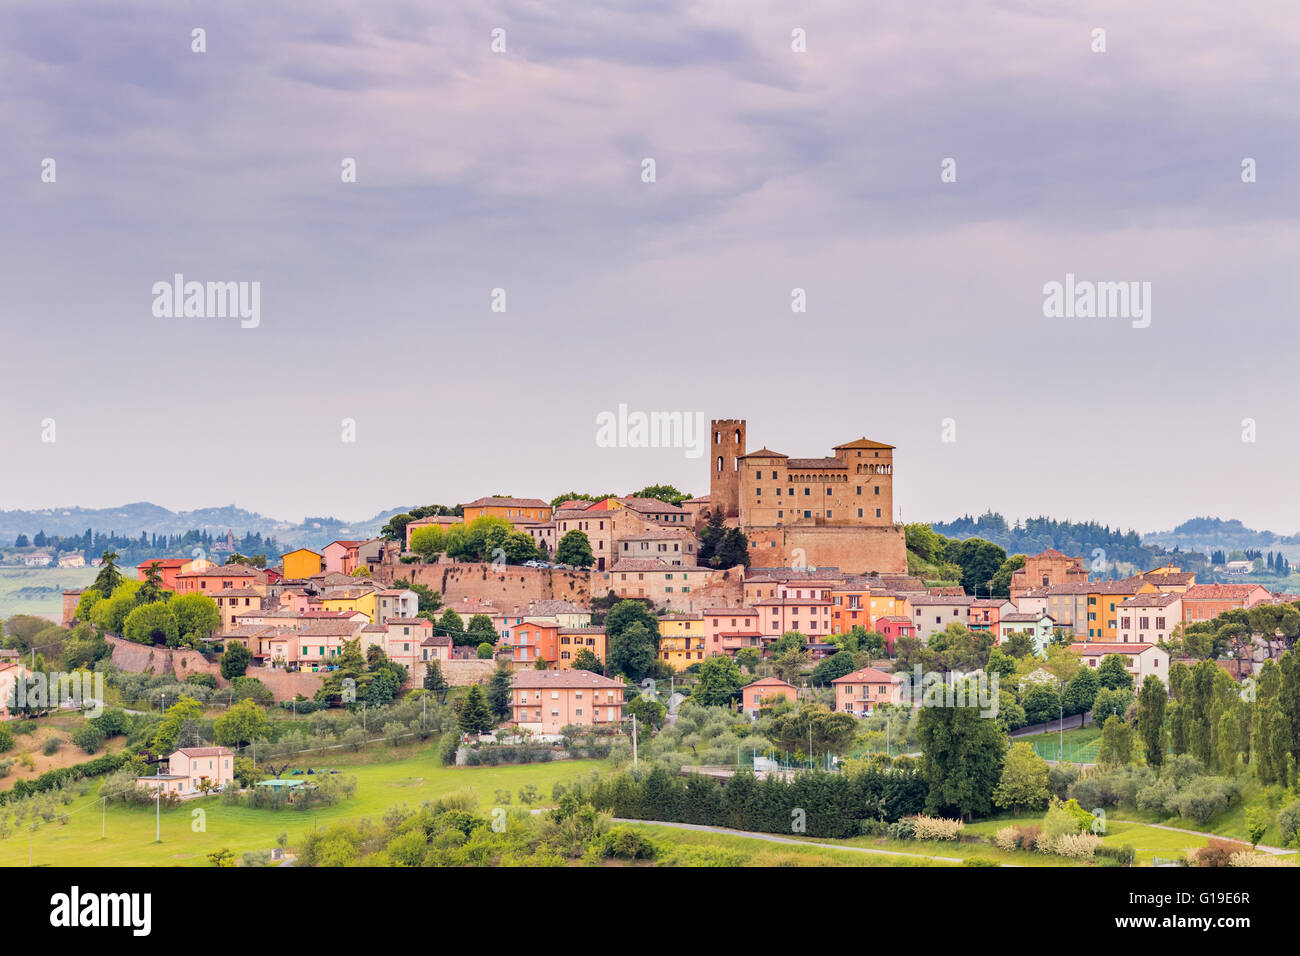 the magic of a medieval castle in the rolling hills of Romagna in Italy Stock Photo